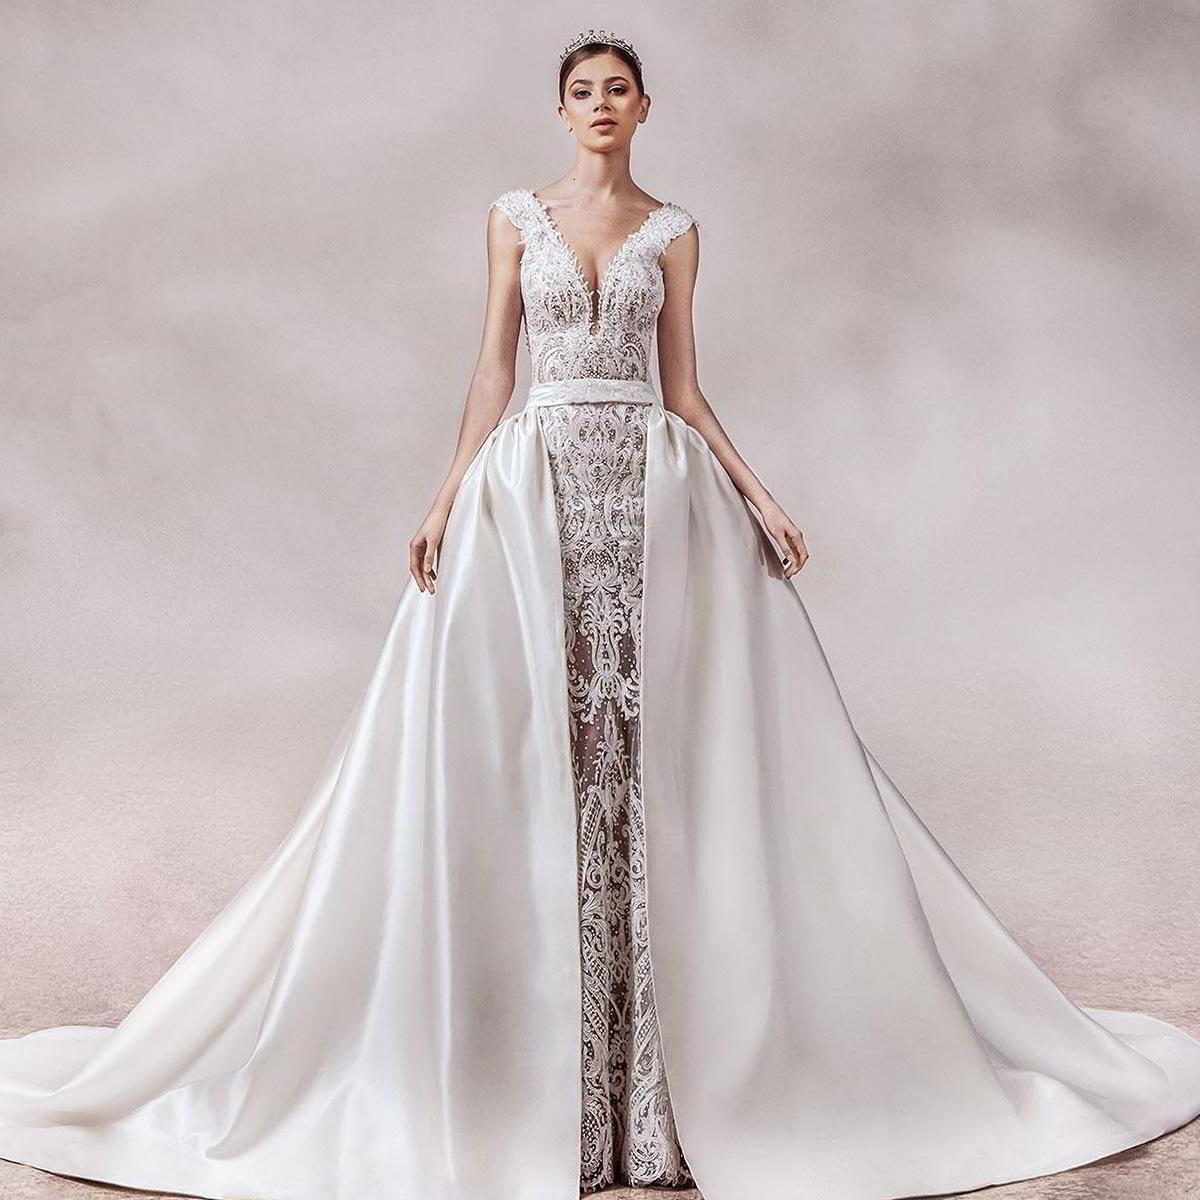 naja saade 2018 bridal wedding inspirasi featured wedding gowns dresses and collection